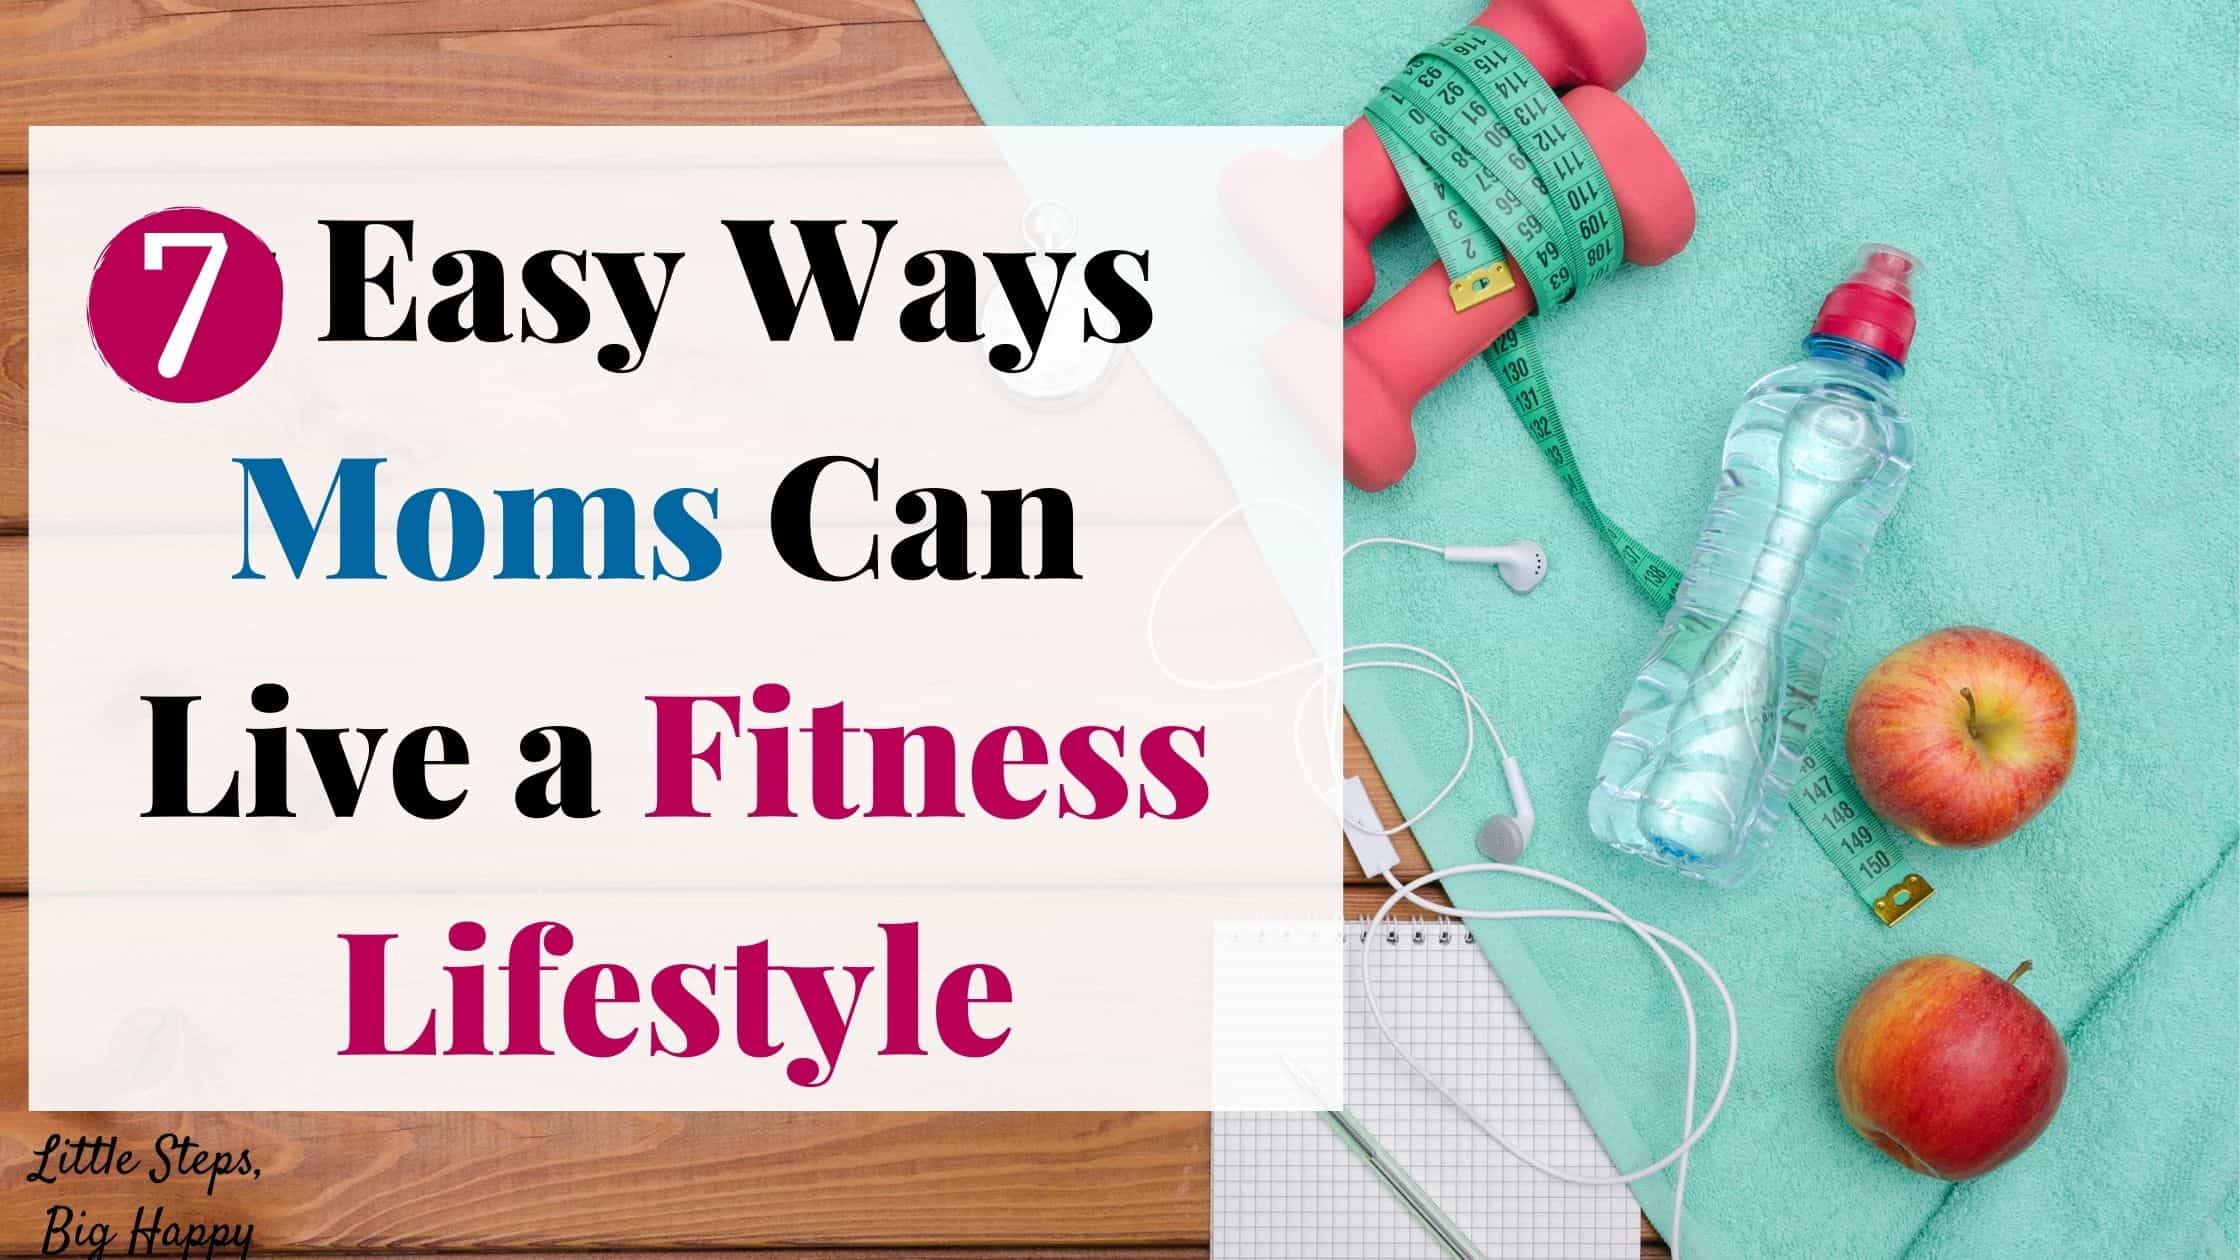 7 Easy Ways Moms Can Live a Fitness Lifestyle